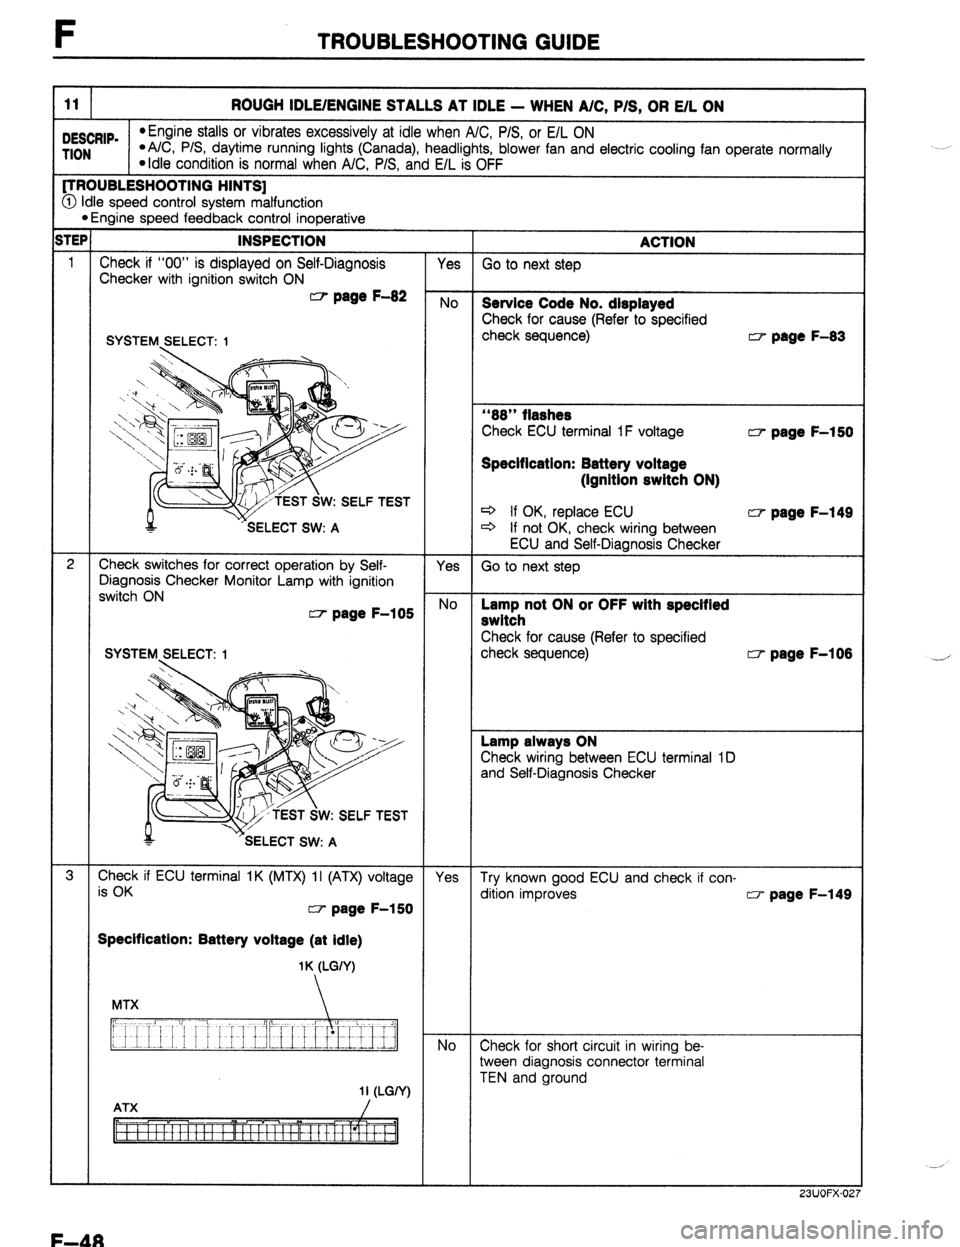 MAZDA PROTEGE 1992  Workshop Manual F TROUBLESHOOTING GUIDE 
11 ROUGH IDLE/ENGINE STALLS AT IDLE - WHEN A/C, P/S, OR E/L ON 
DESCRIP. 
*Engine stalls or vibrates excessively at idle when A/C, P/S, or E/L ON TION *A/C, P/S, daytime runni